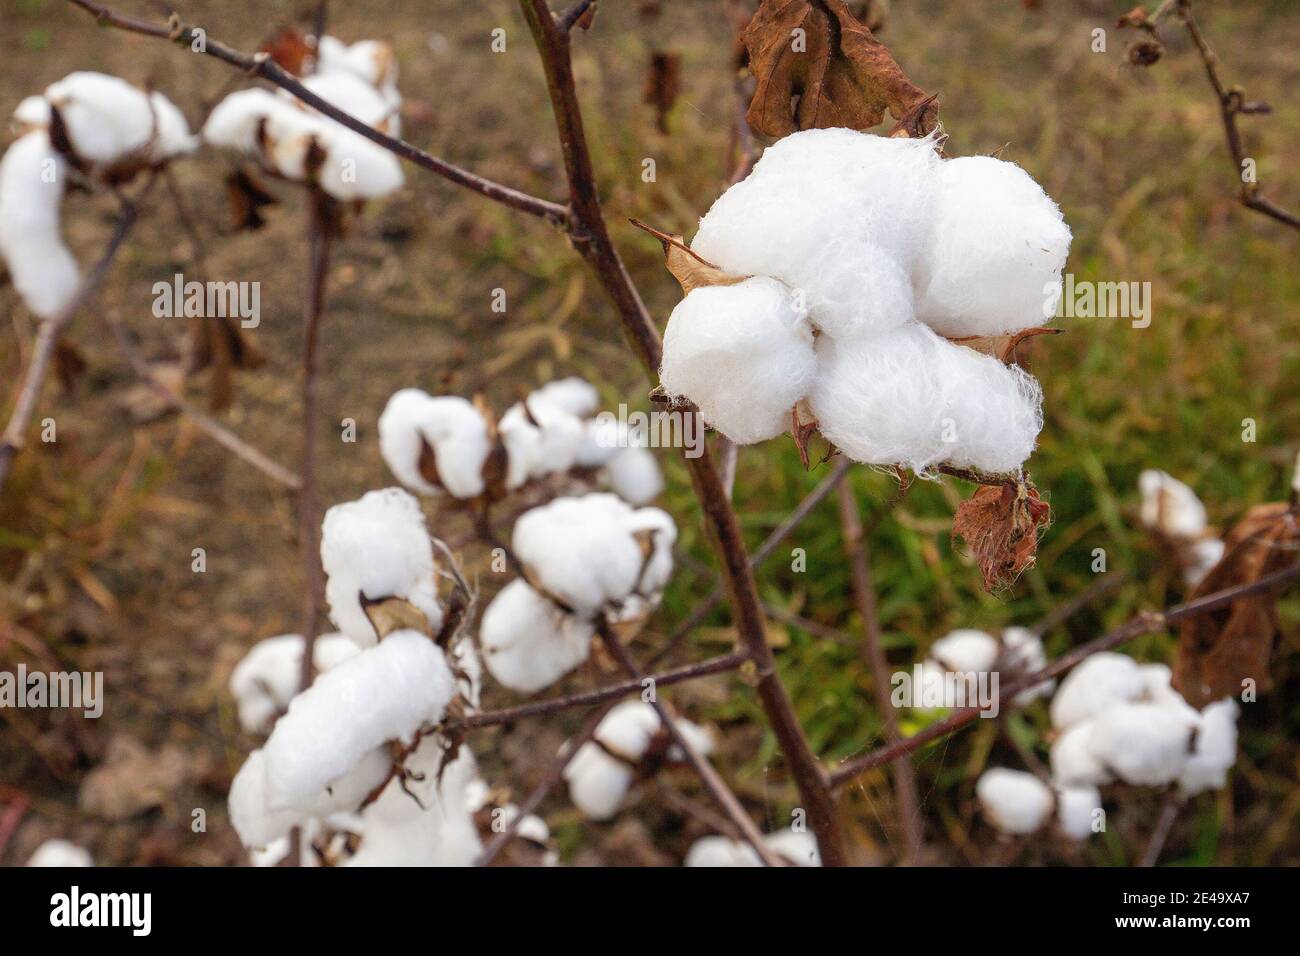 A field of cotton ready for harvest near Vienna Georgia. Cotton is Georgia's number one row crop. Stock Photo